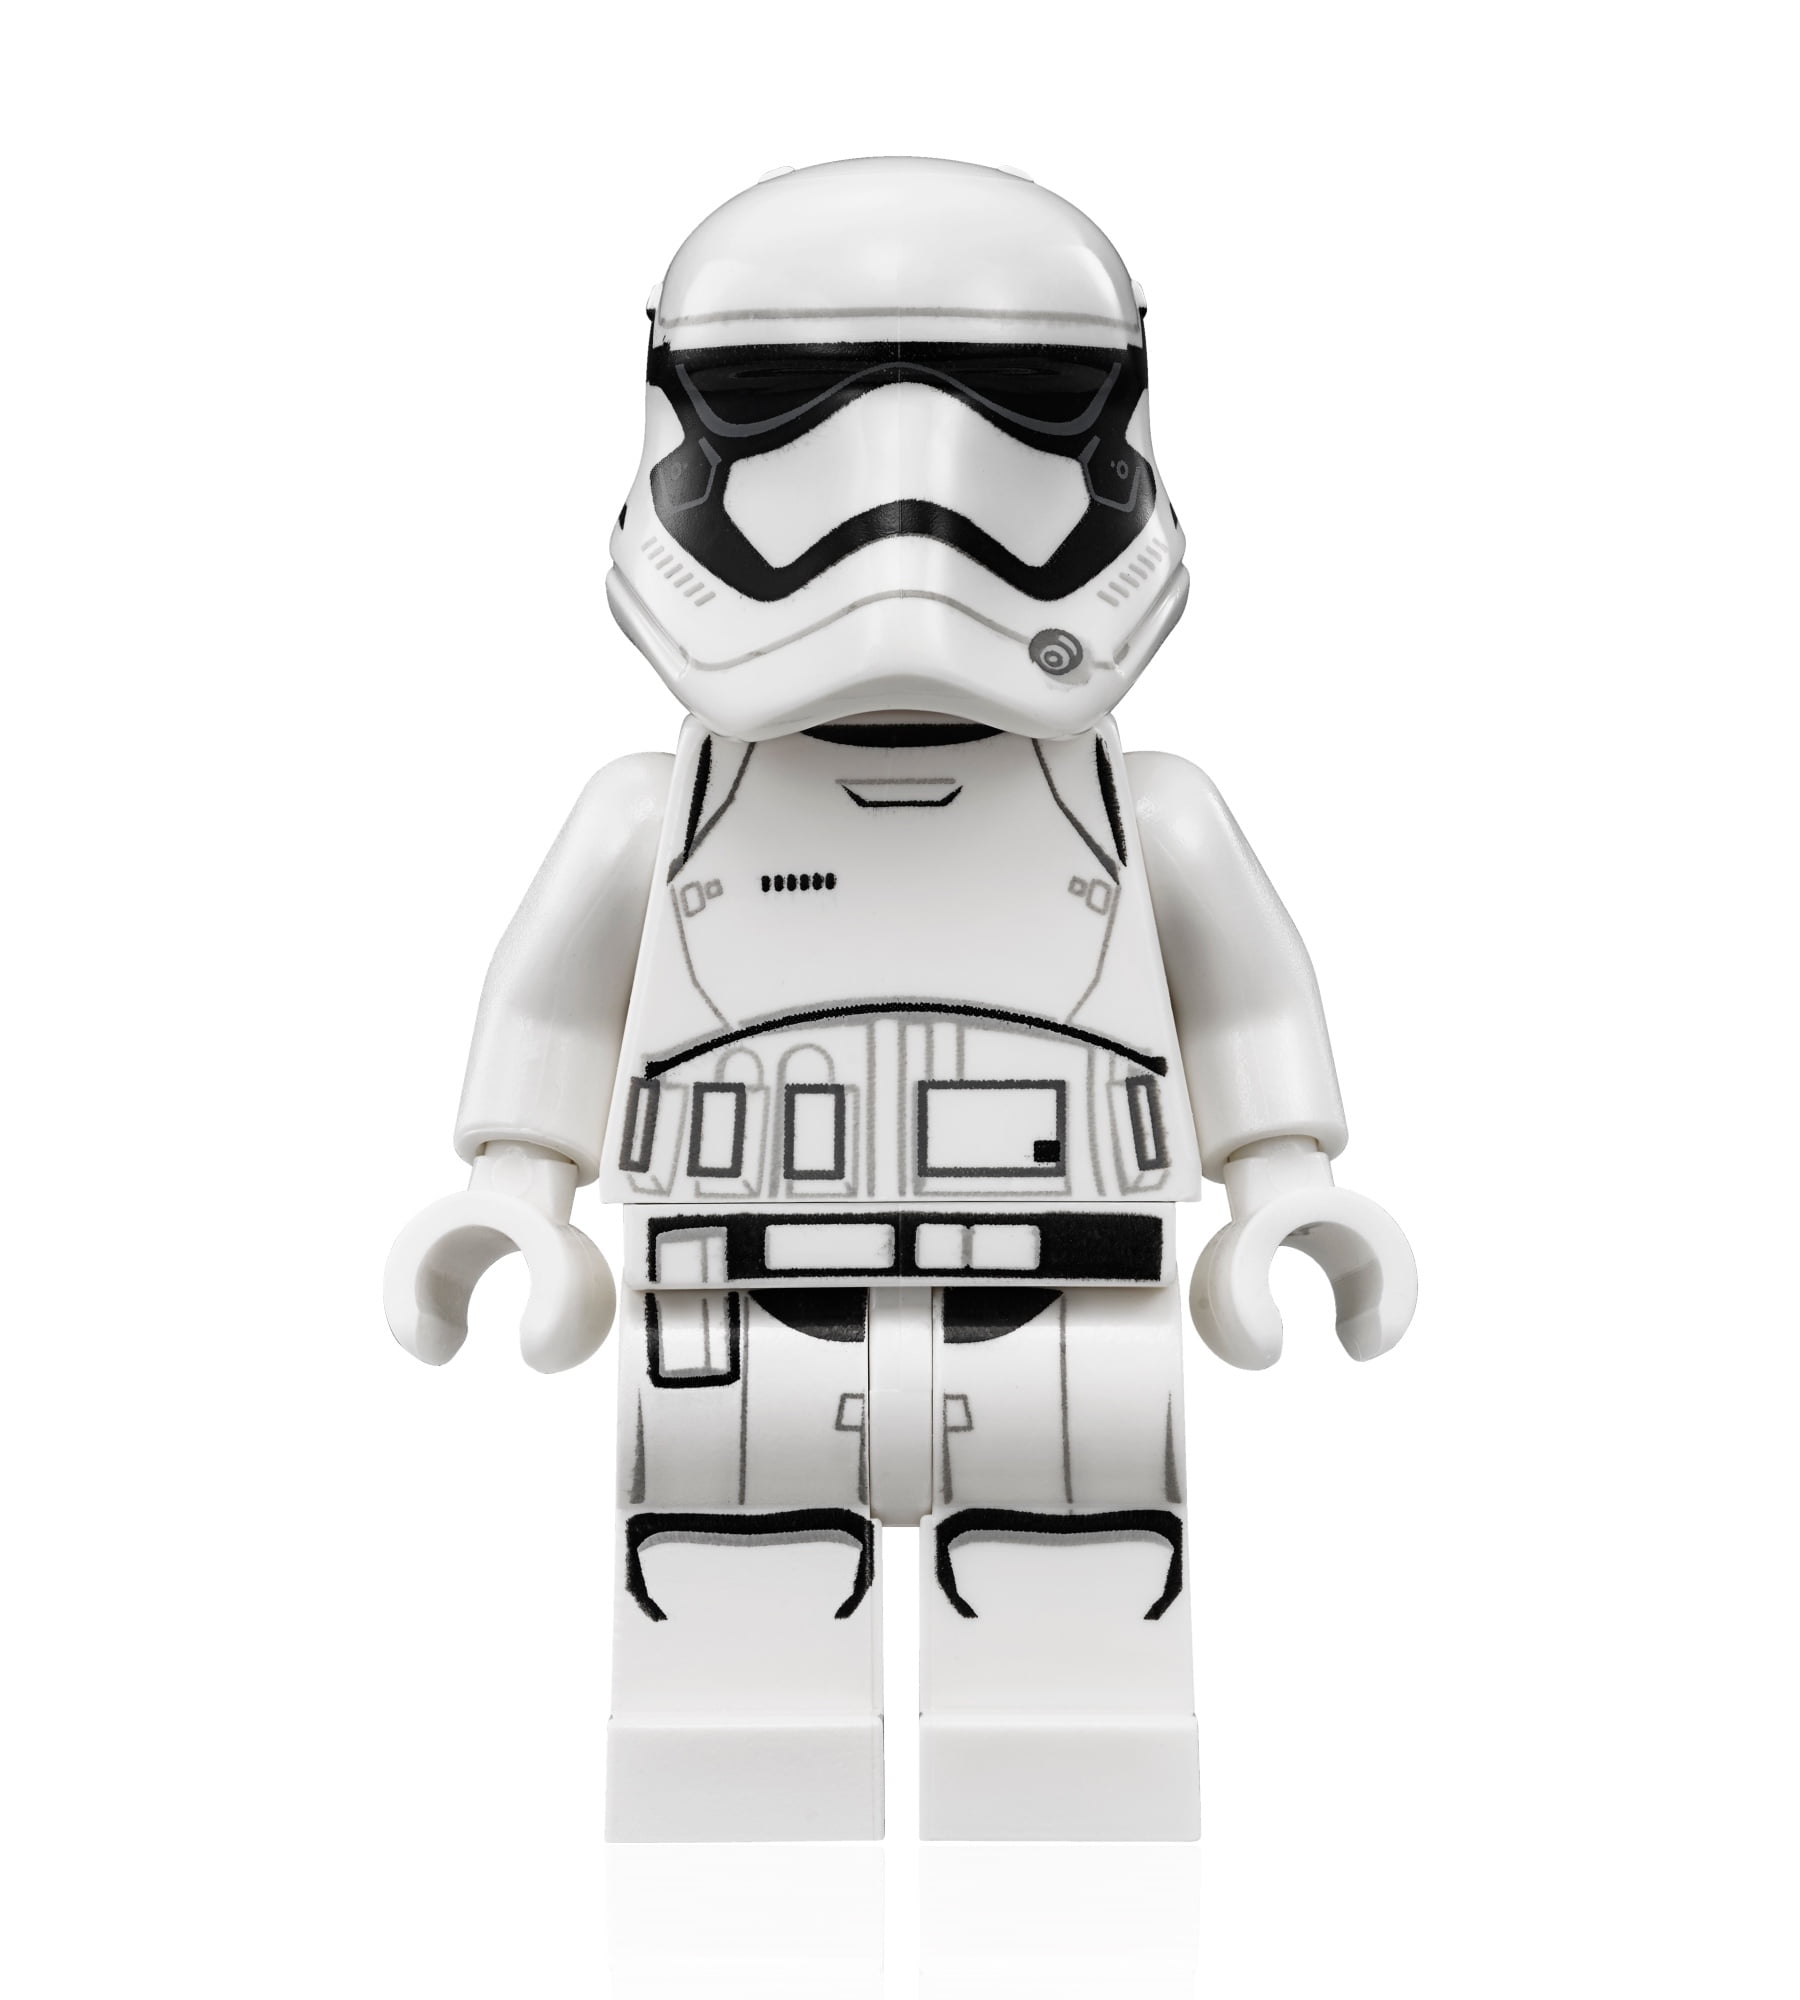 LEGO Star Wars The Force Awakens Minifigure Pack of 2 First Order Stormtrooper with Blaster Guns 